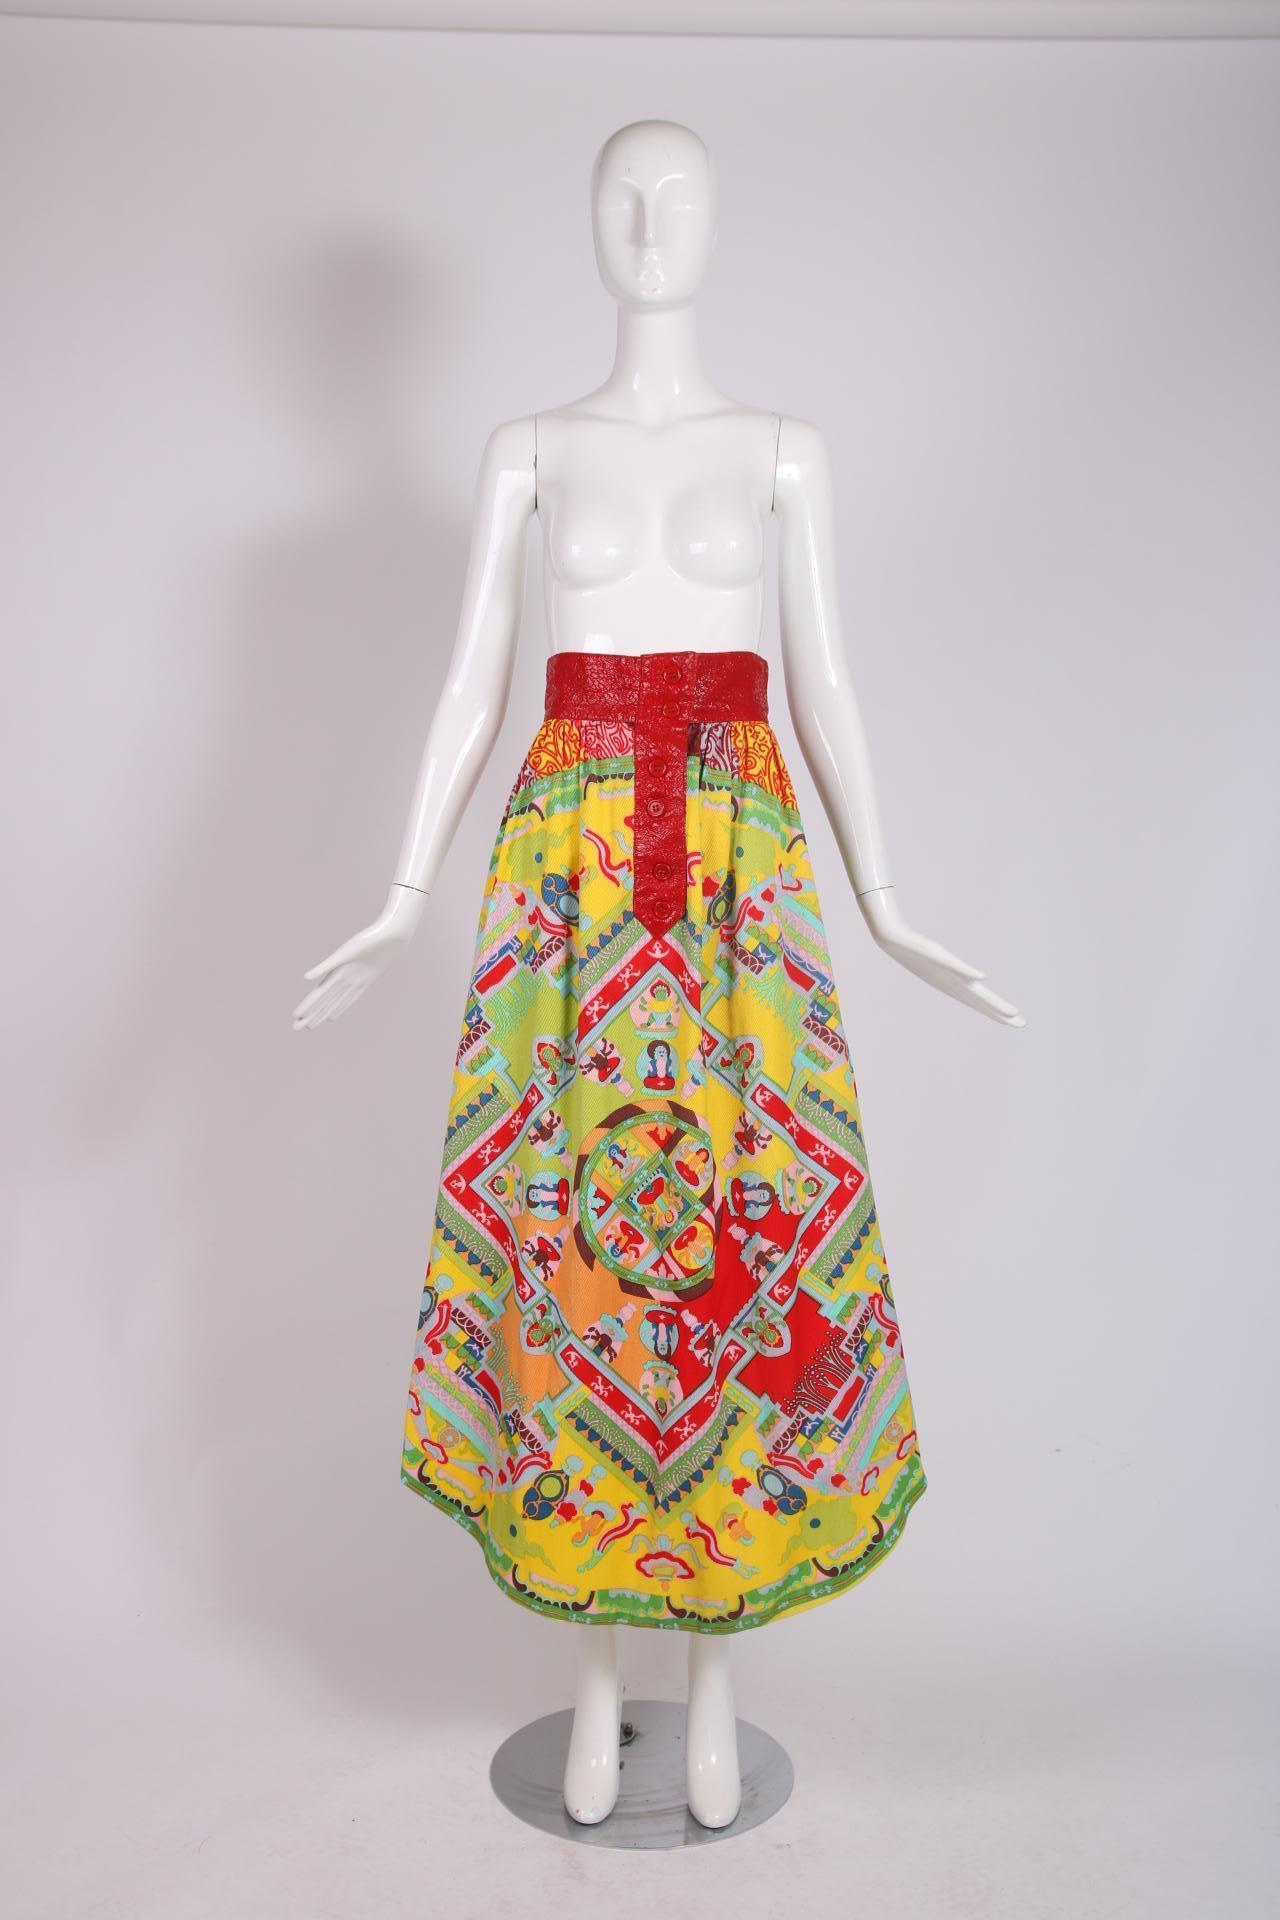 A 1970's Lanvin maxi skirt with a rounded hem, red pleather trim at the waist, red button closures just below the waist and a colorful graphic 